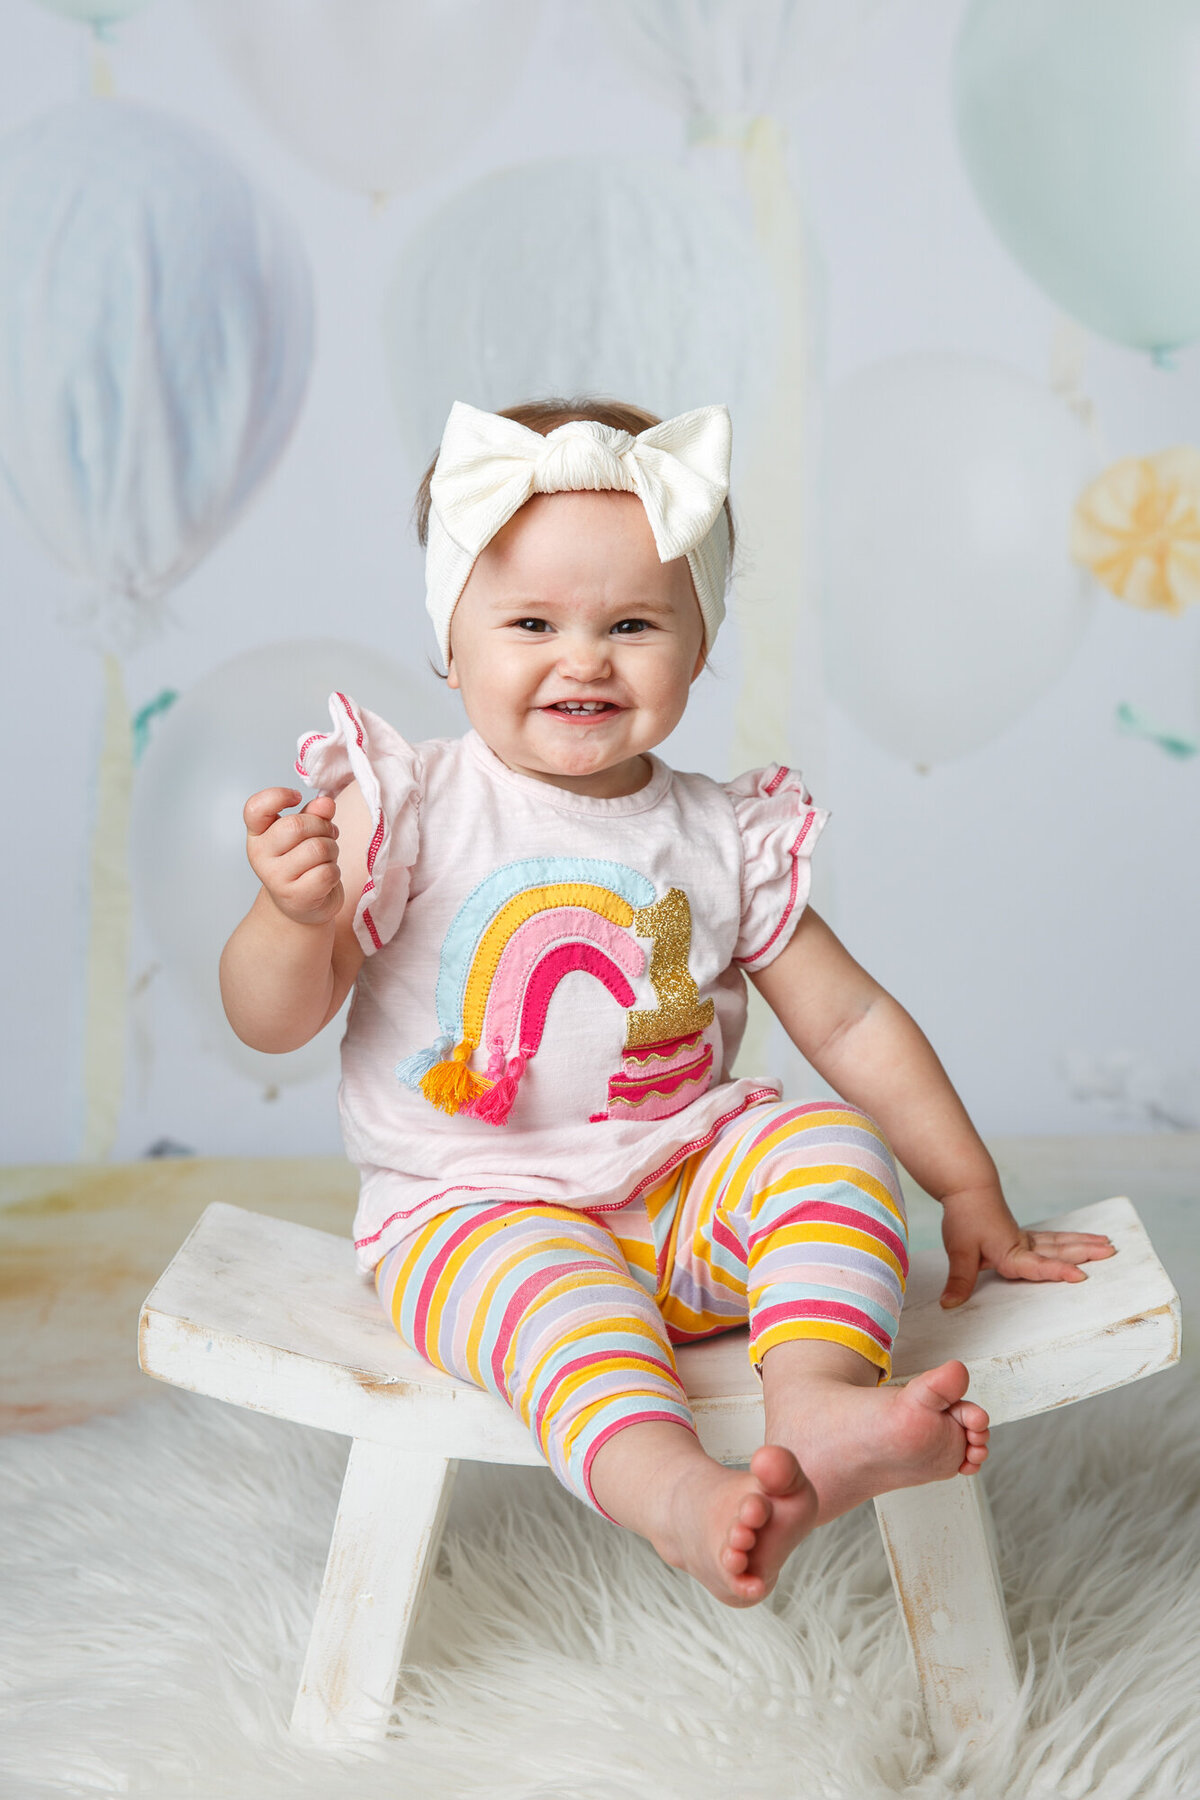 Cute toddler girl wearing a rainbow shirt and smiling